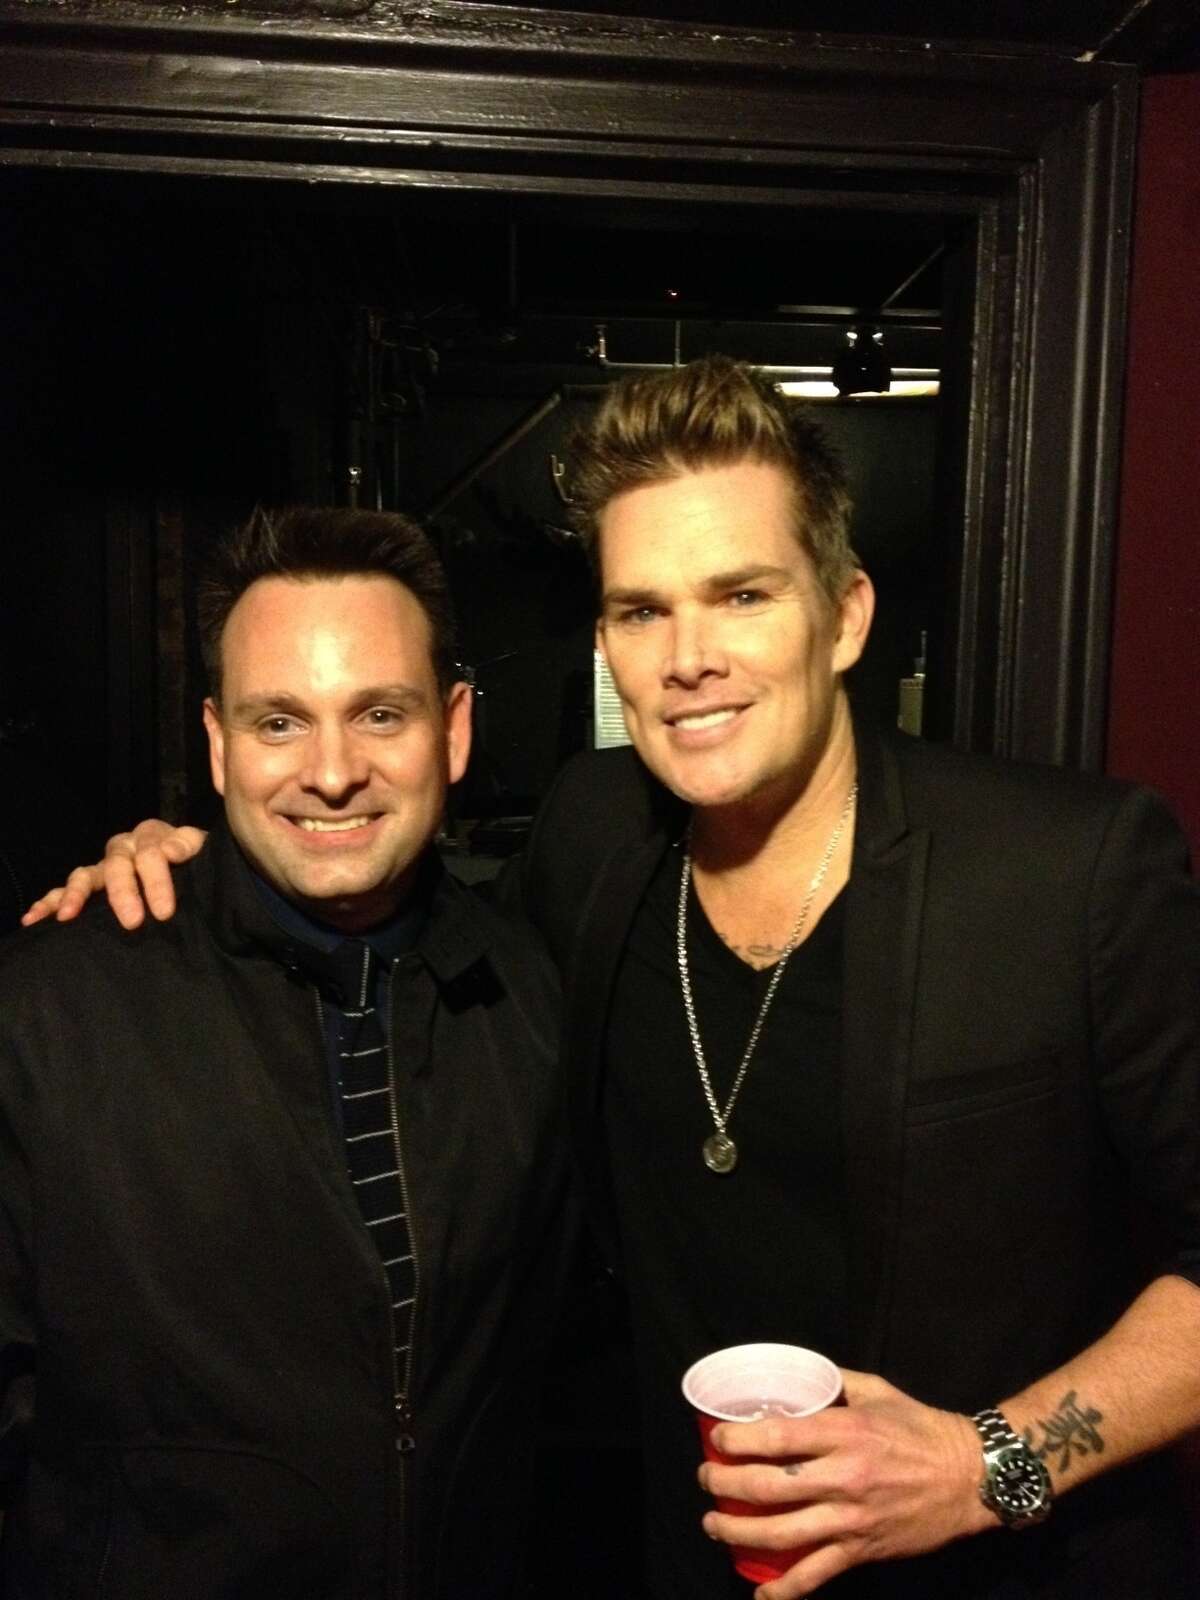 Greenwich Selectman Drew Marzullo, board member of the Greenwich-based Red Ribbon Foundation with musician Mark McGrath of Sugar Ray at the Red Ribbon Gala at Capital Theatre in Port Chester, N.Y., on April 6, 2013.